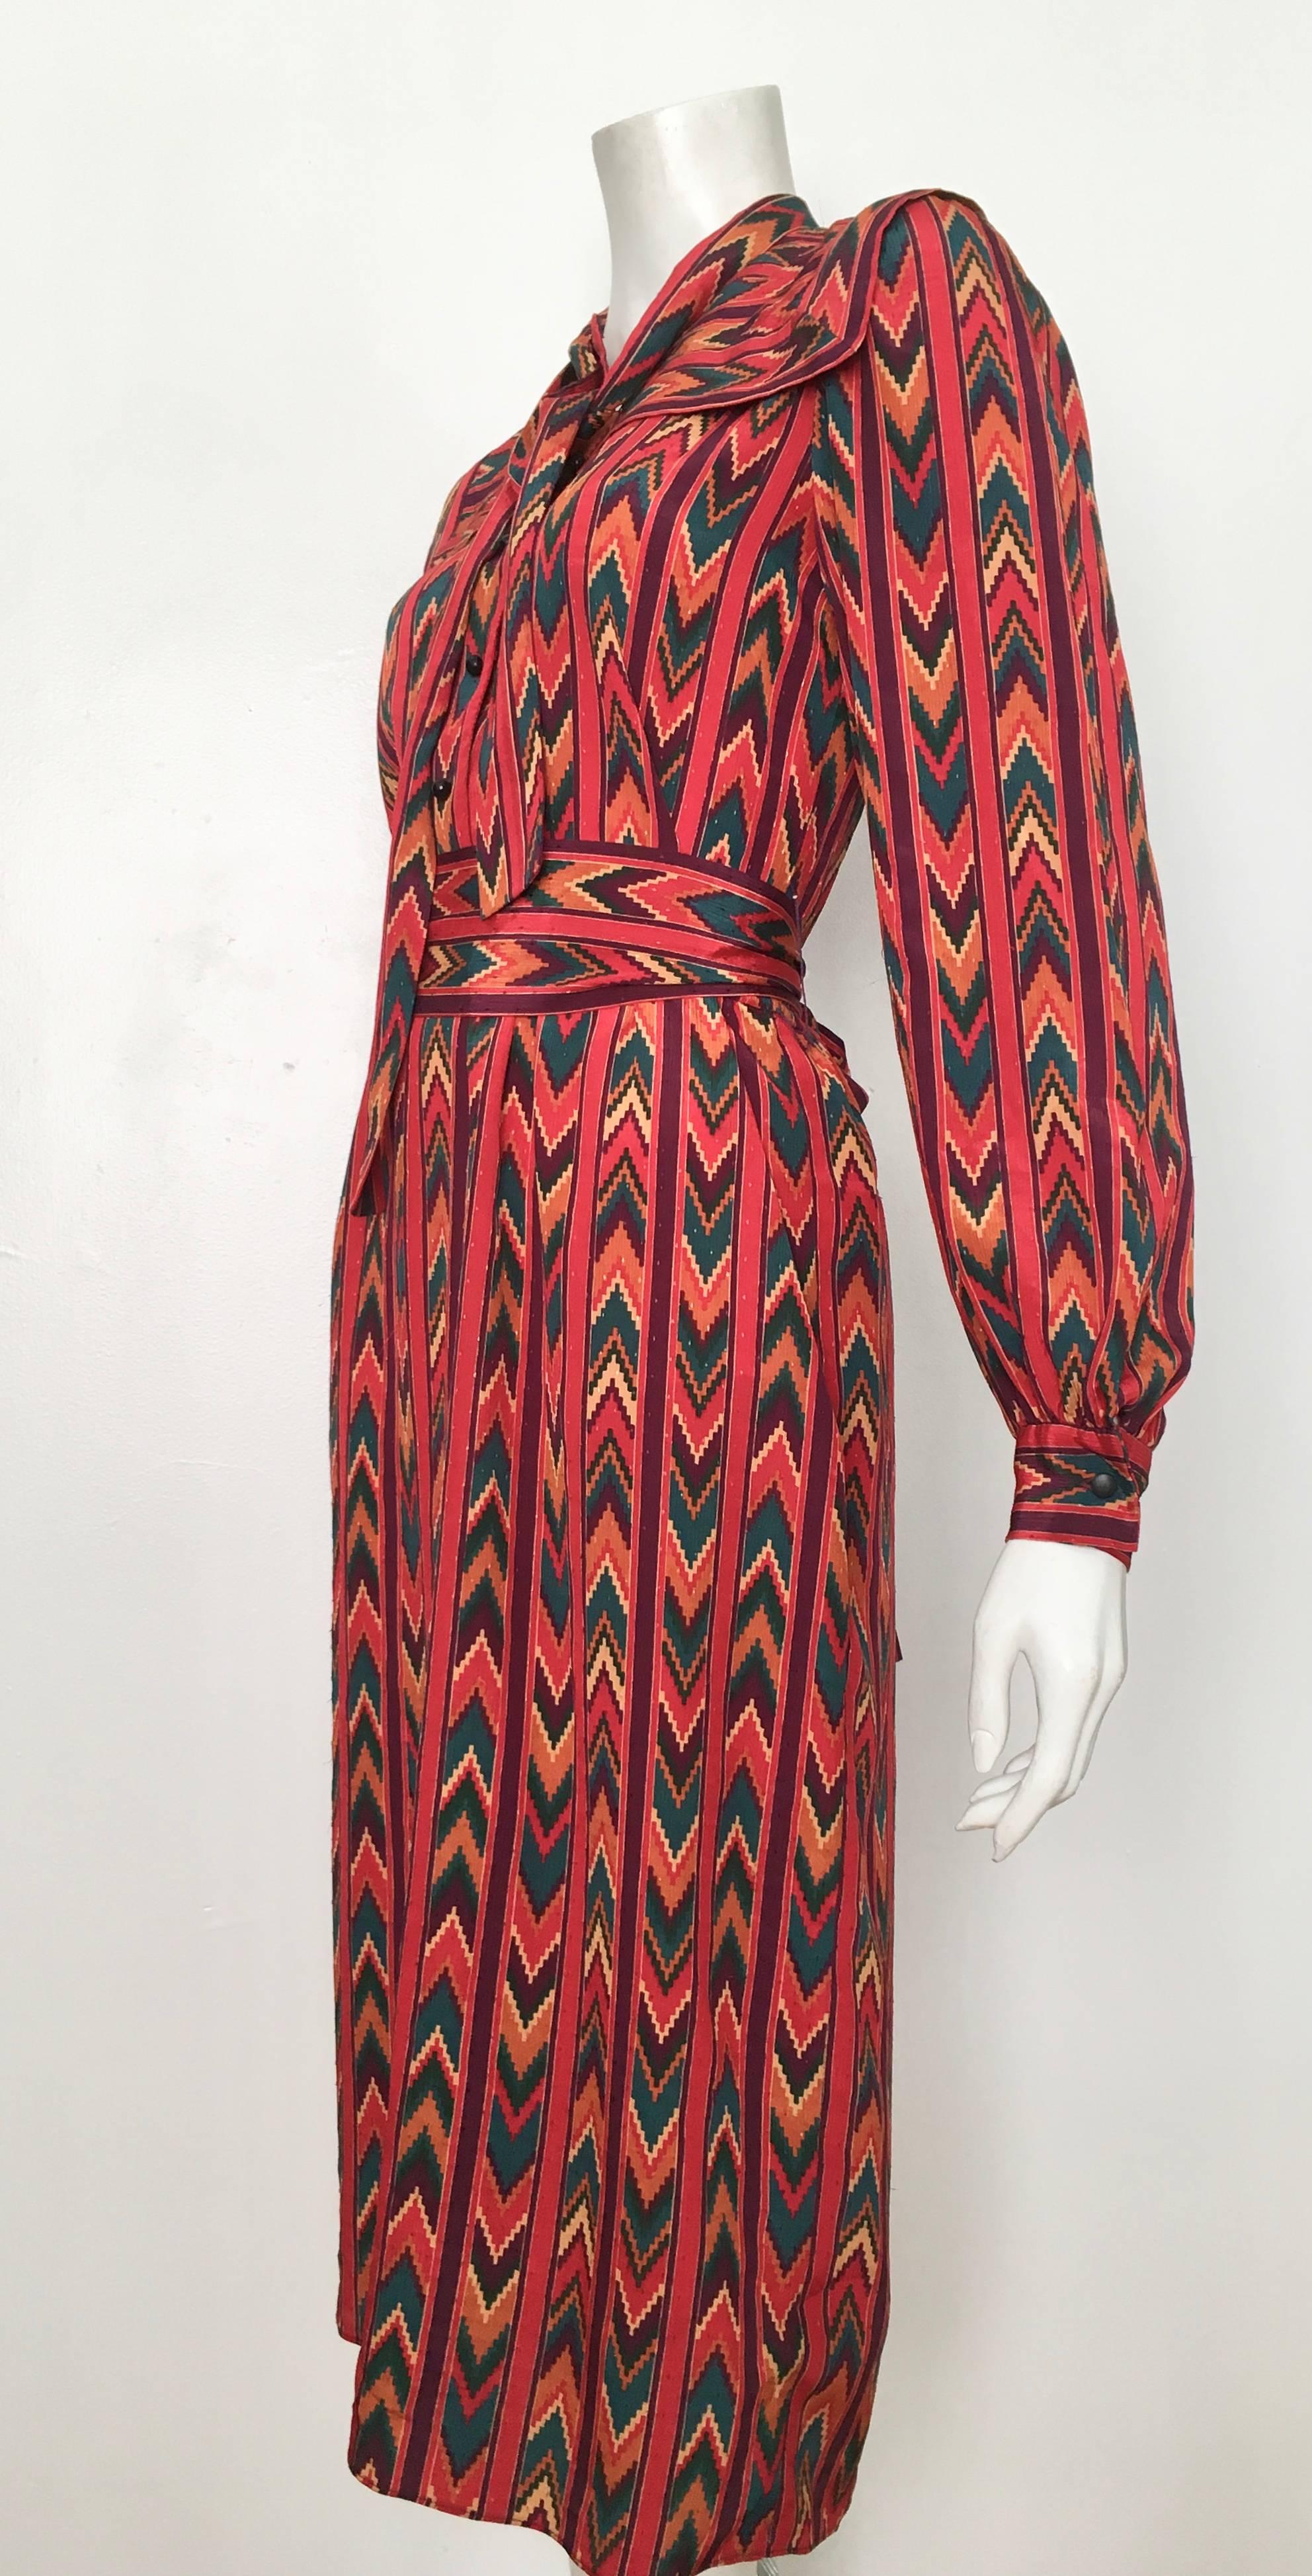 Women's or Men's Molly Parnis 1980s Native American Print Dress Size 10. For Sale